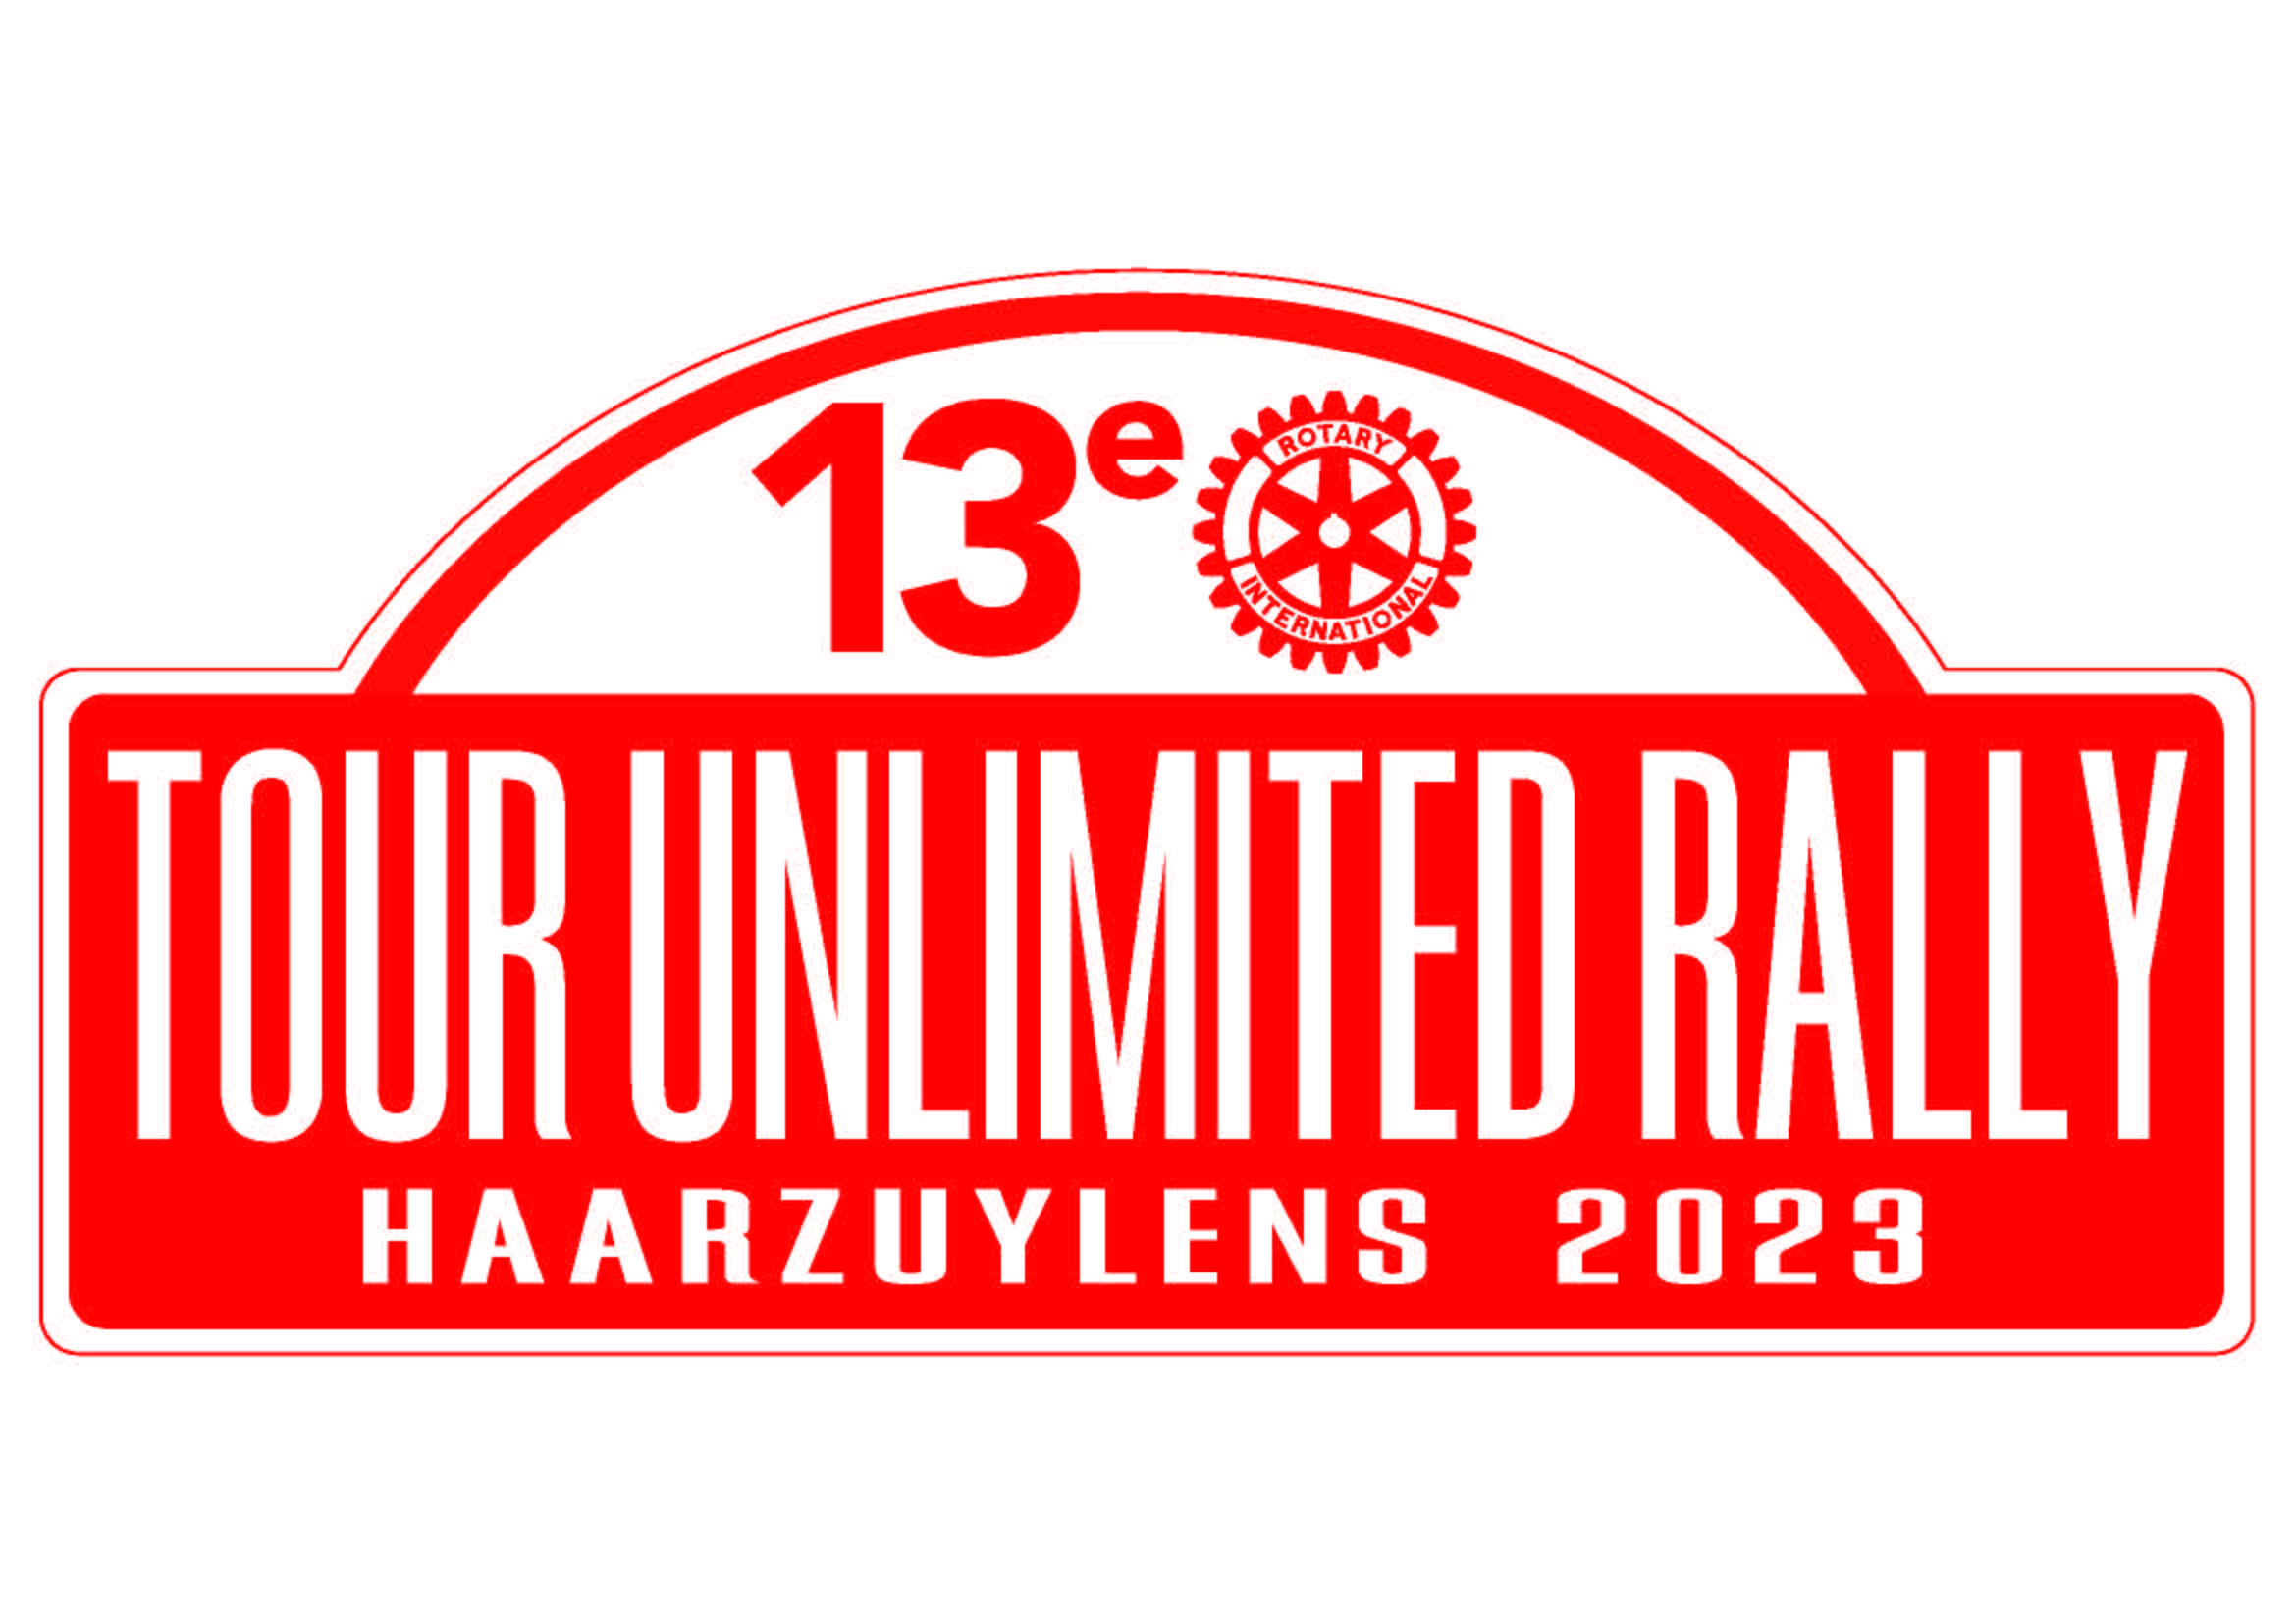 Tour Unlimited Rally 2023 Logo